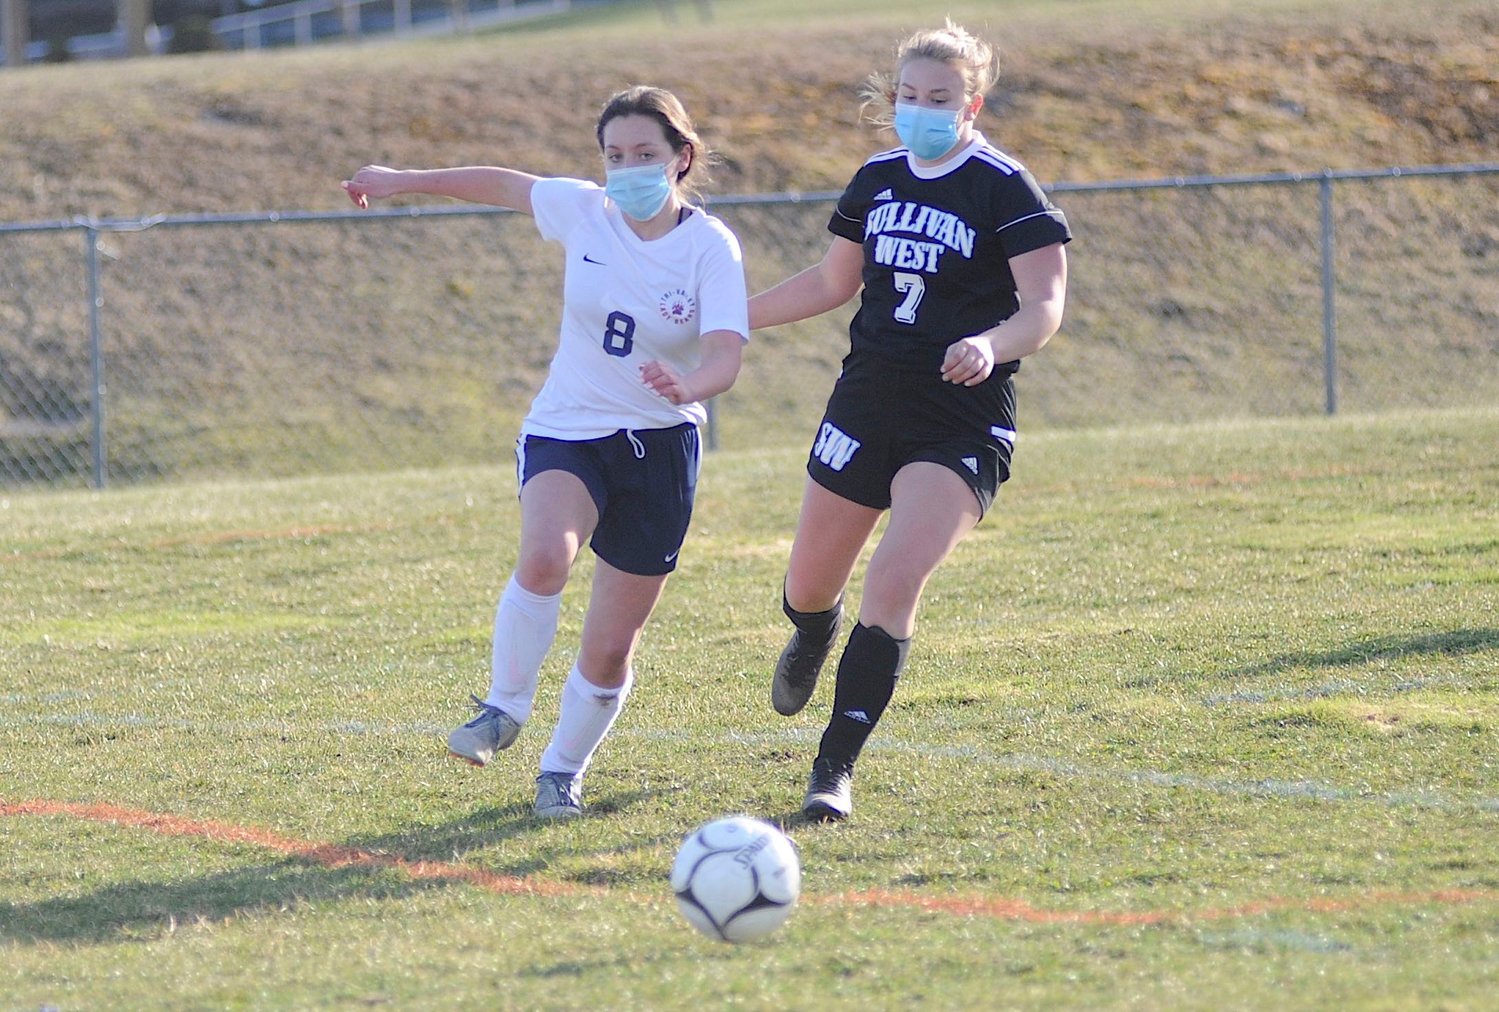 Eyes on the distant goal. Tri-Valley’s Clare Verbert and Sullivan West’s Laura Smith.